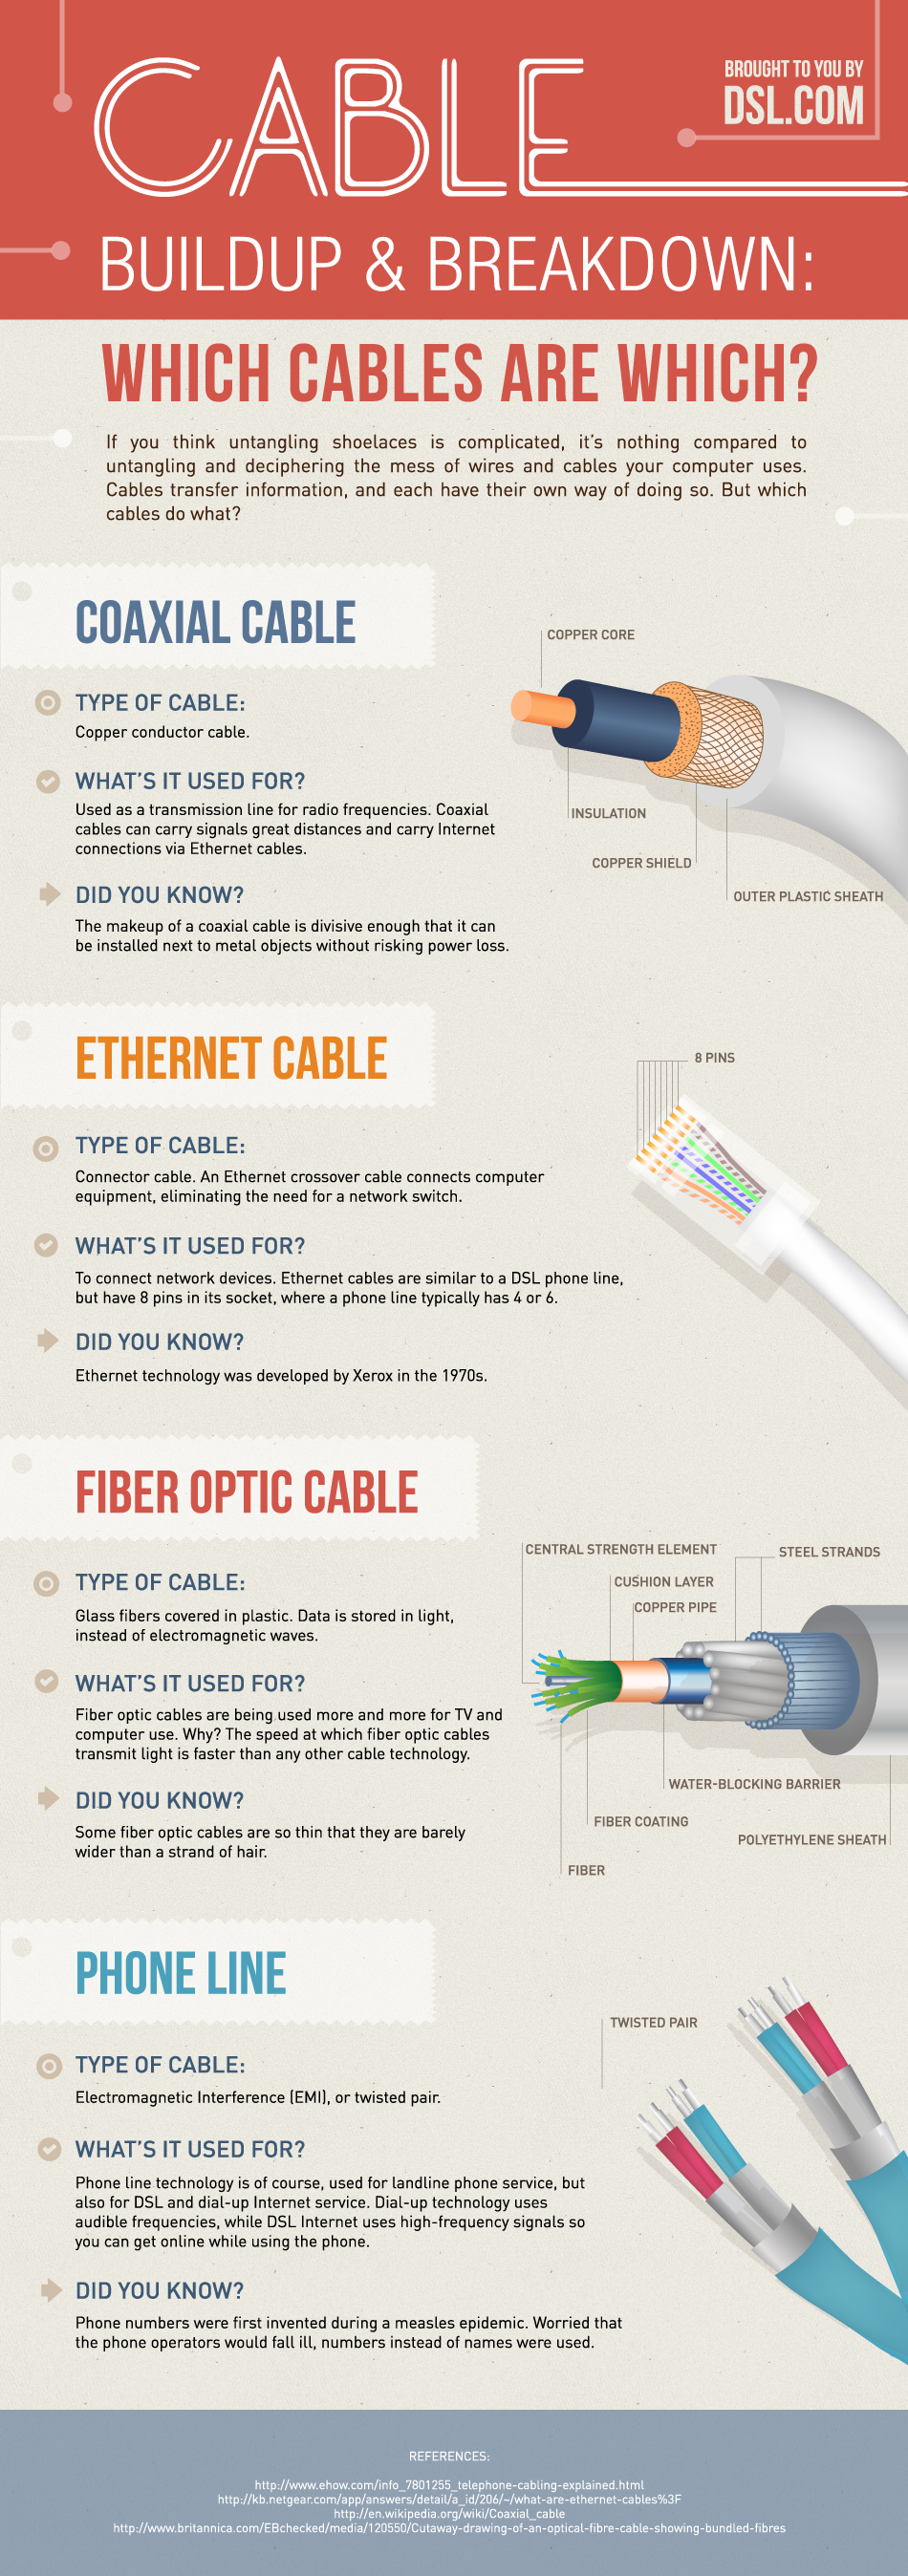 Internet Cable Breakdown (Infographic)